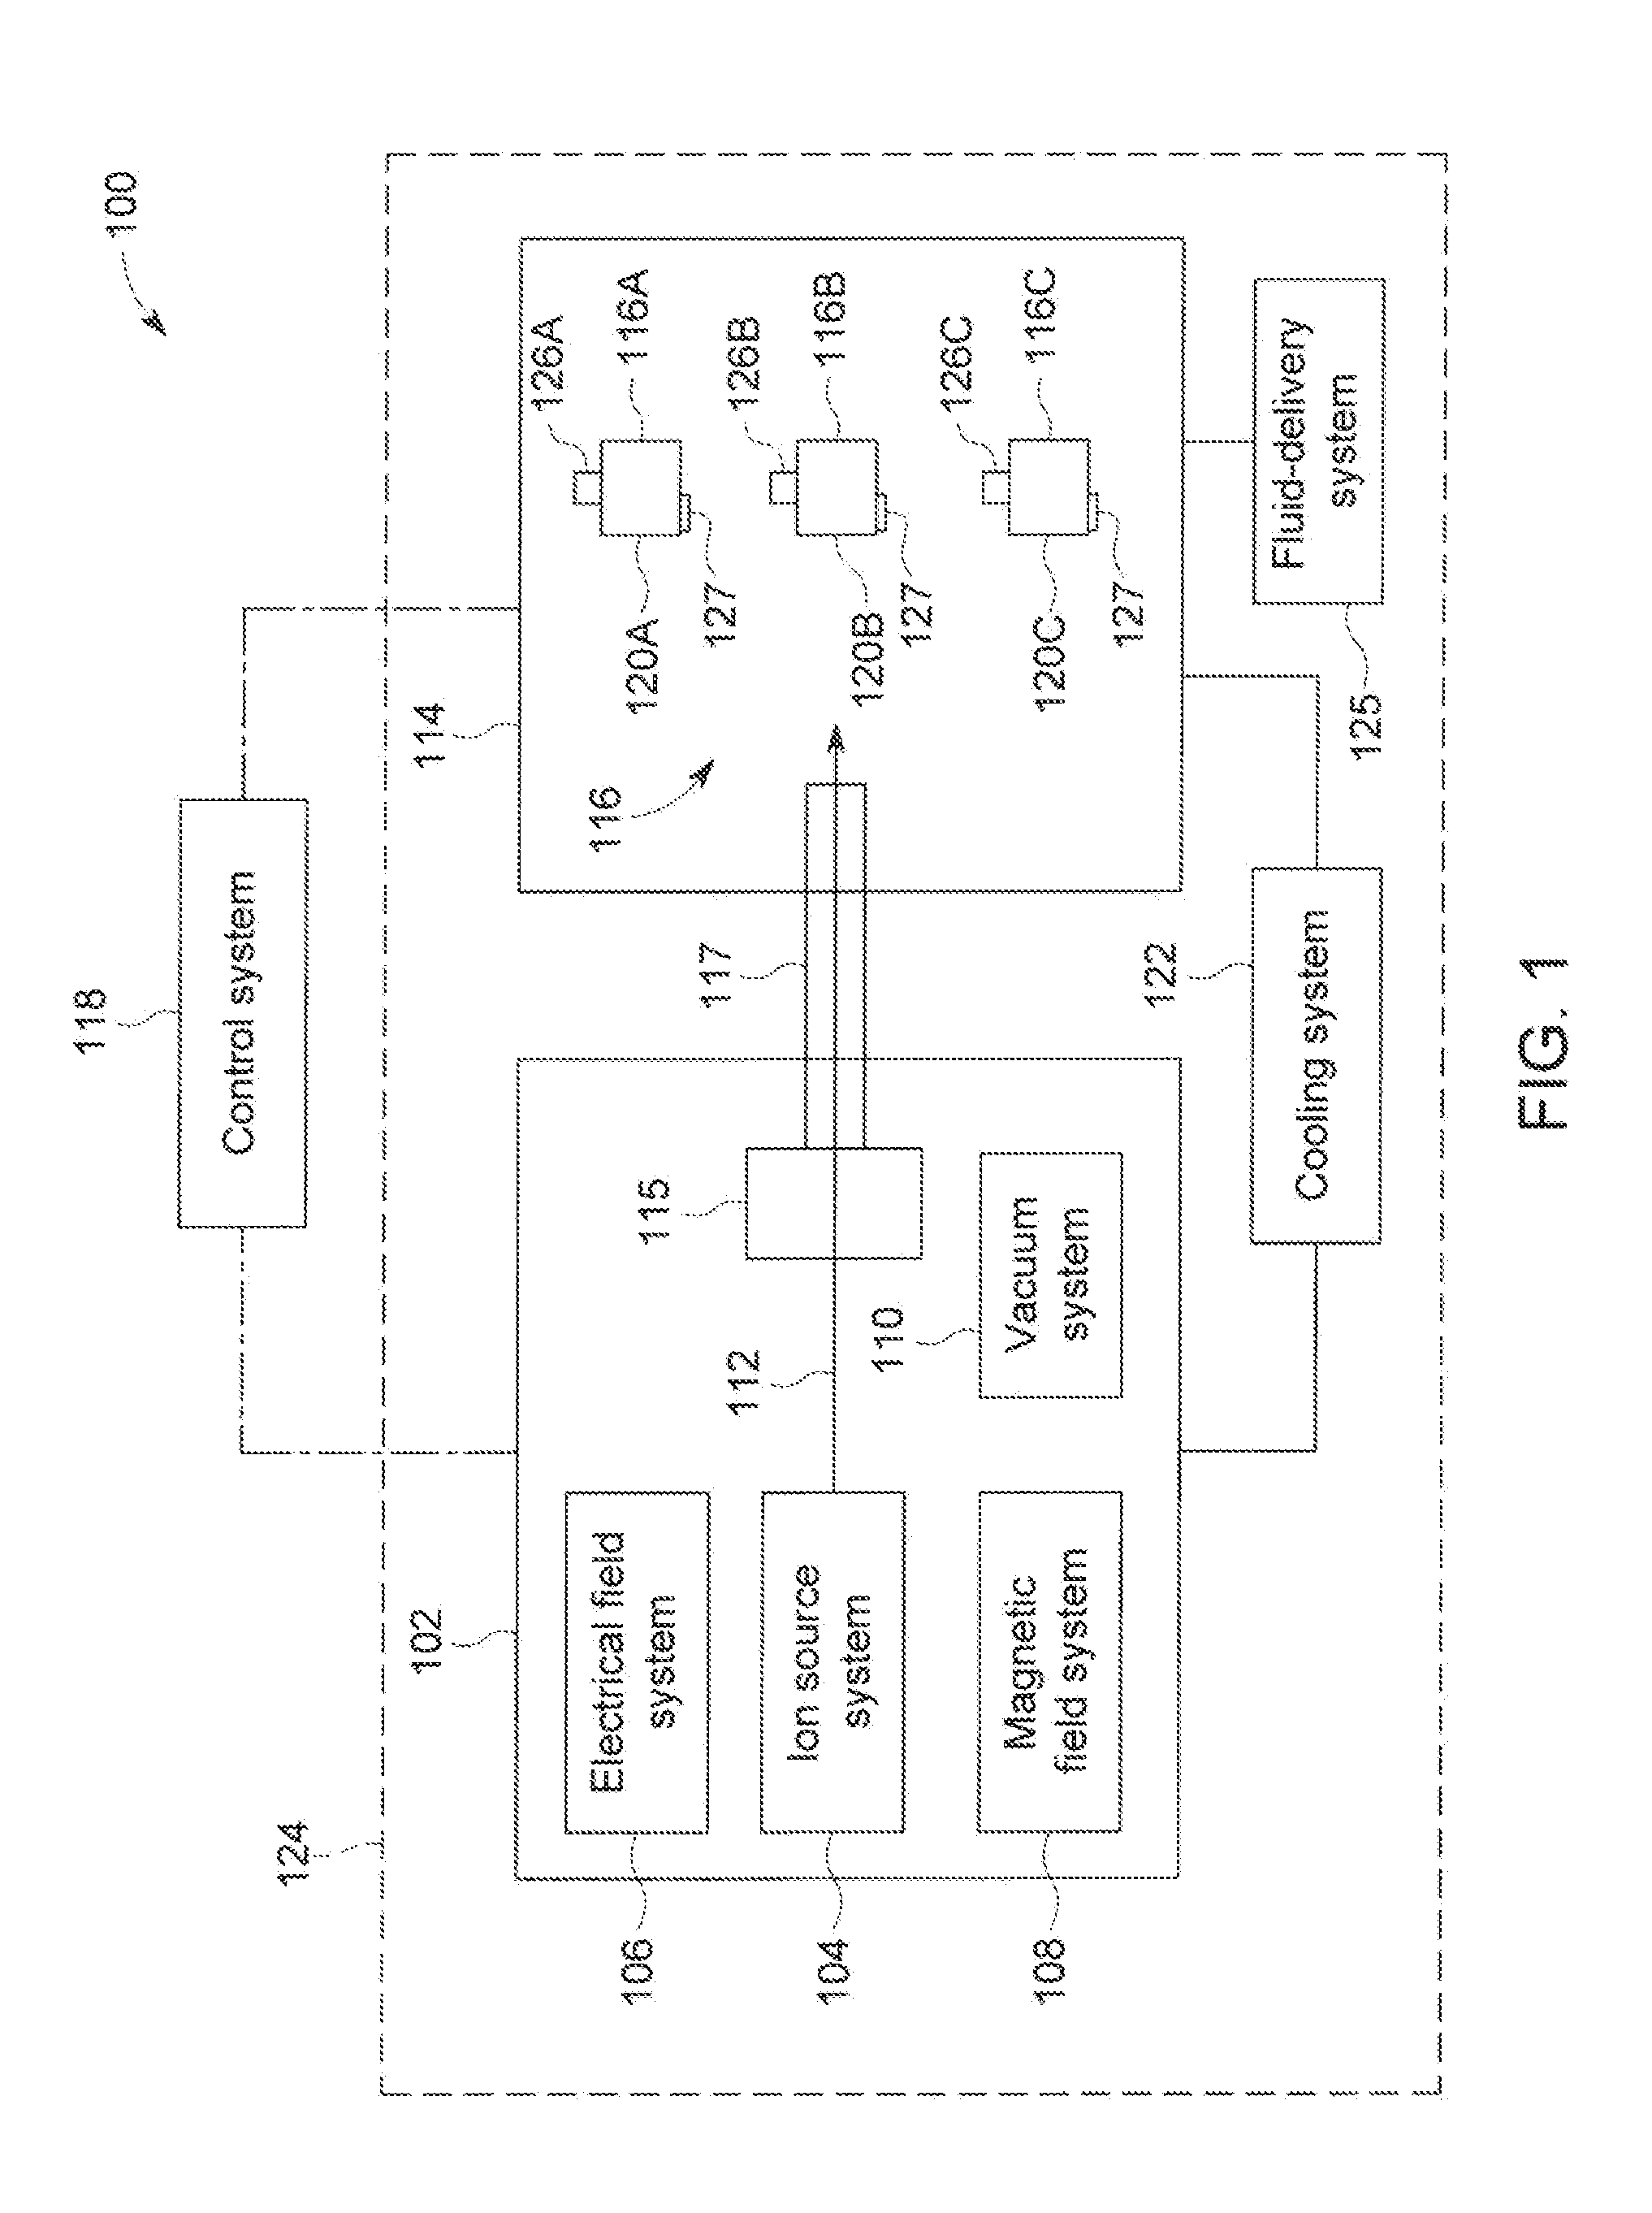 Target assembly and isotope production system having a vibrating device